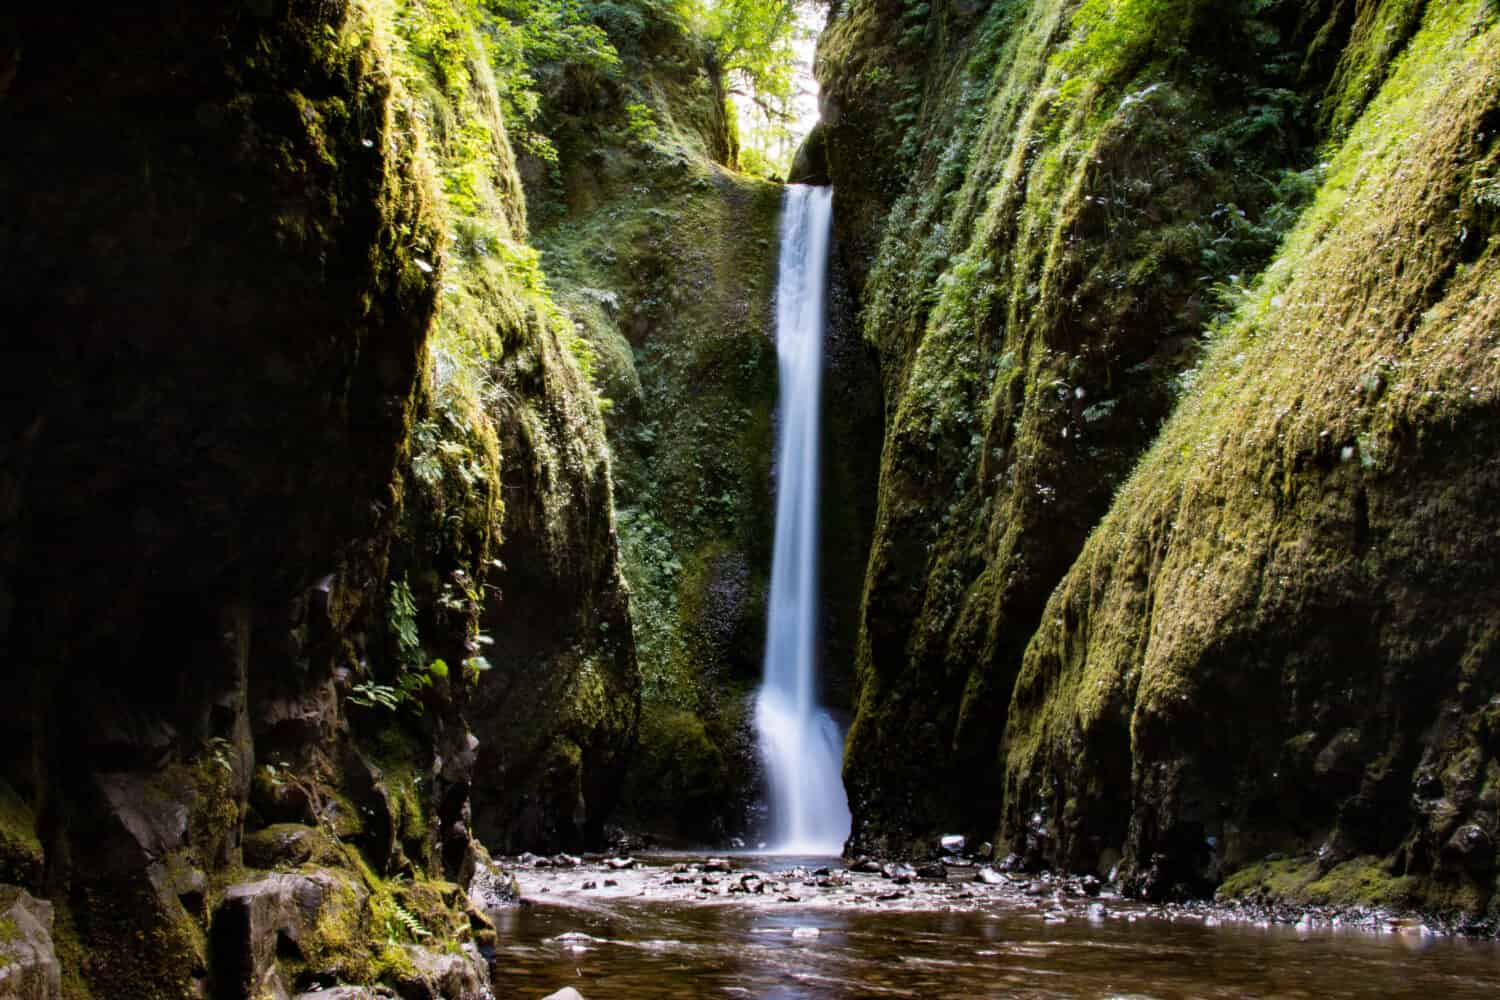 Waterfall in Oneonta Gorge in the Columbia River Gorge in the American state of Oregon.